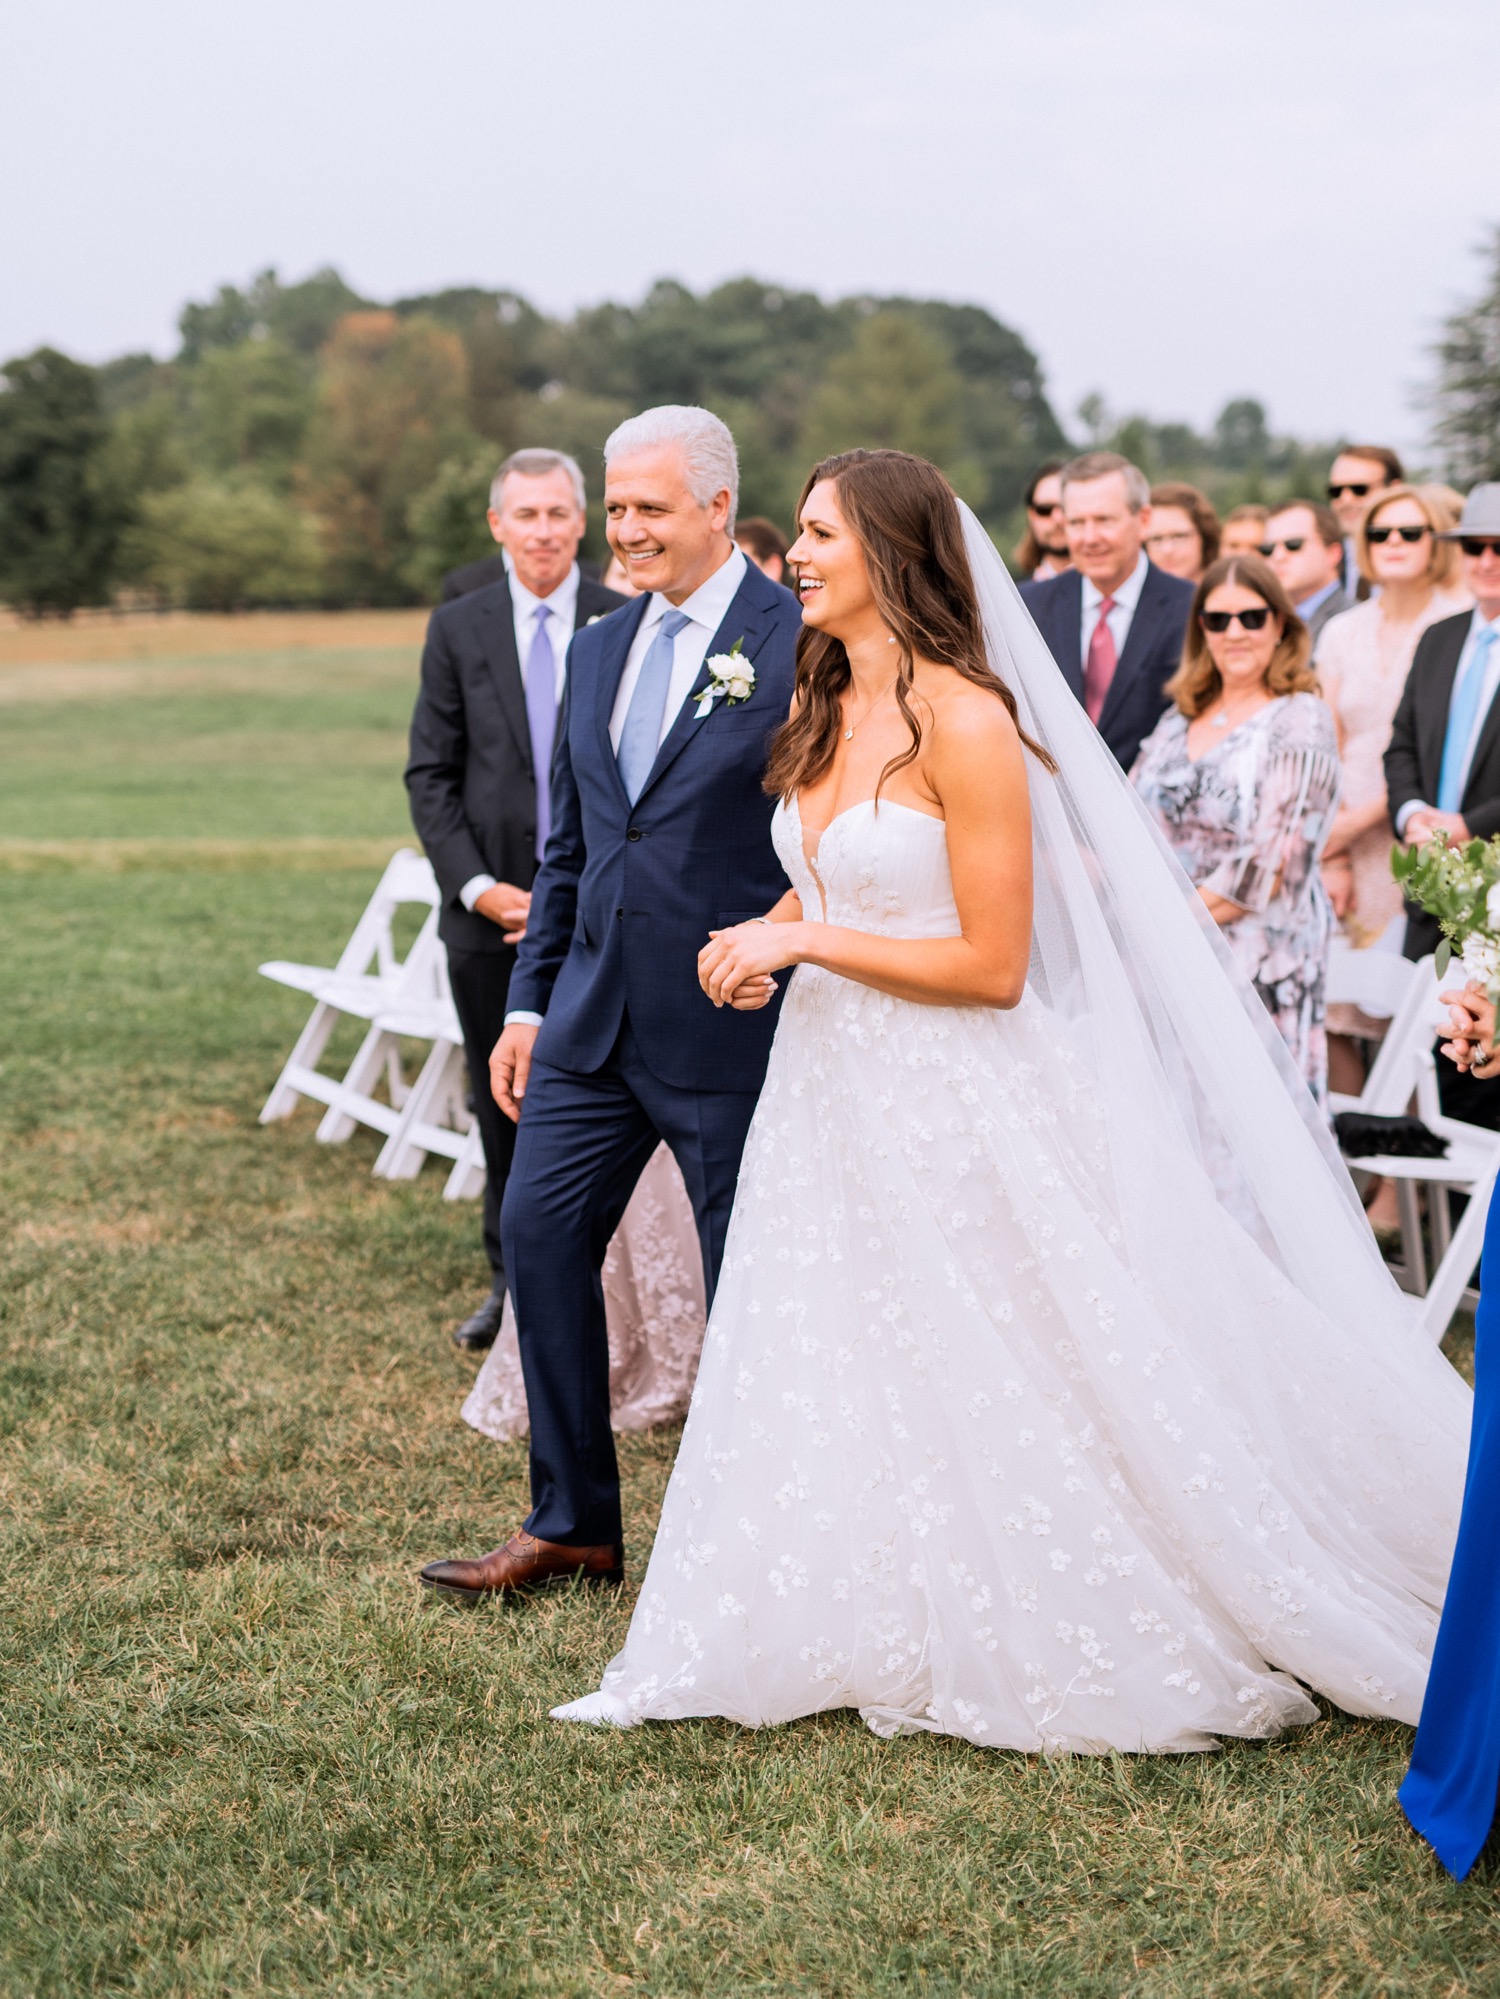 bride walking down the aisle with her dad escorting her